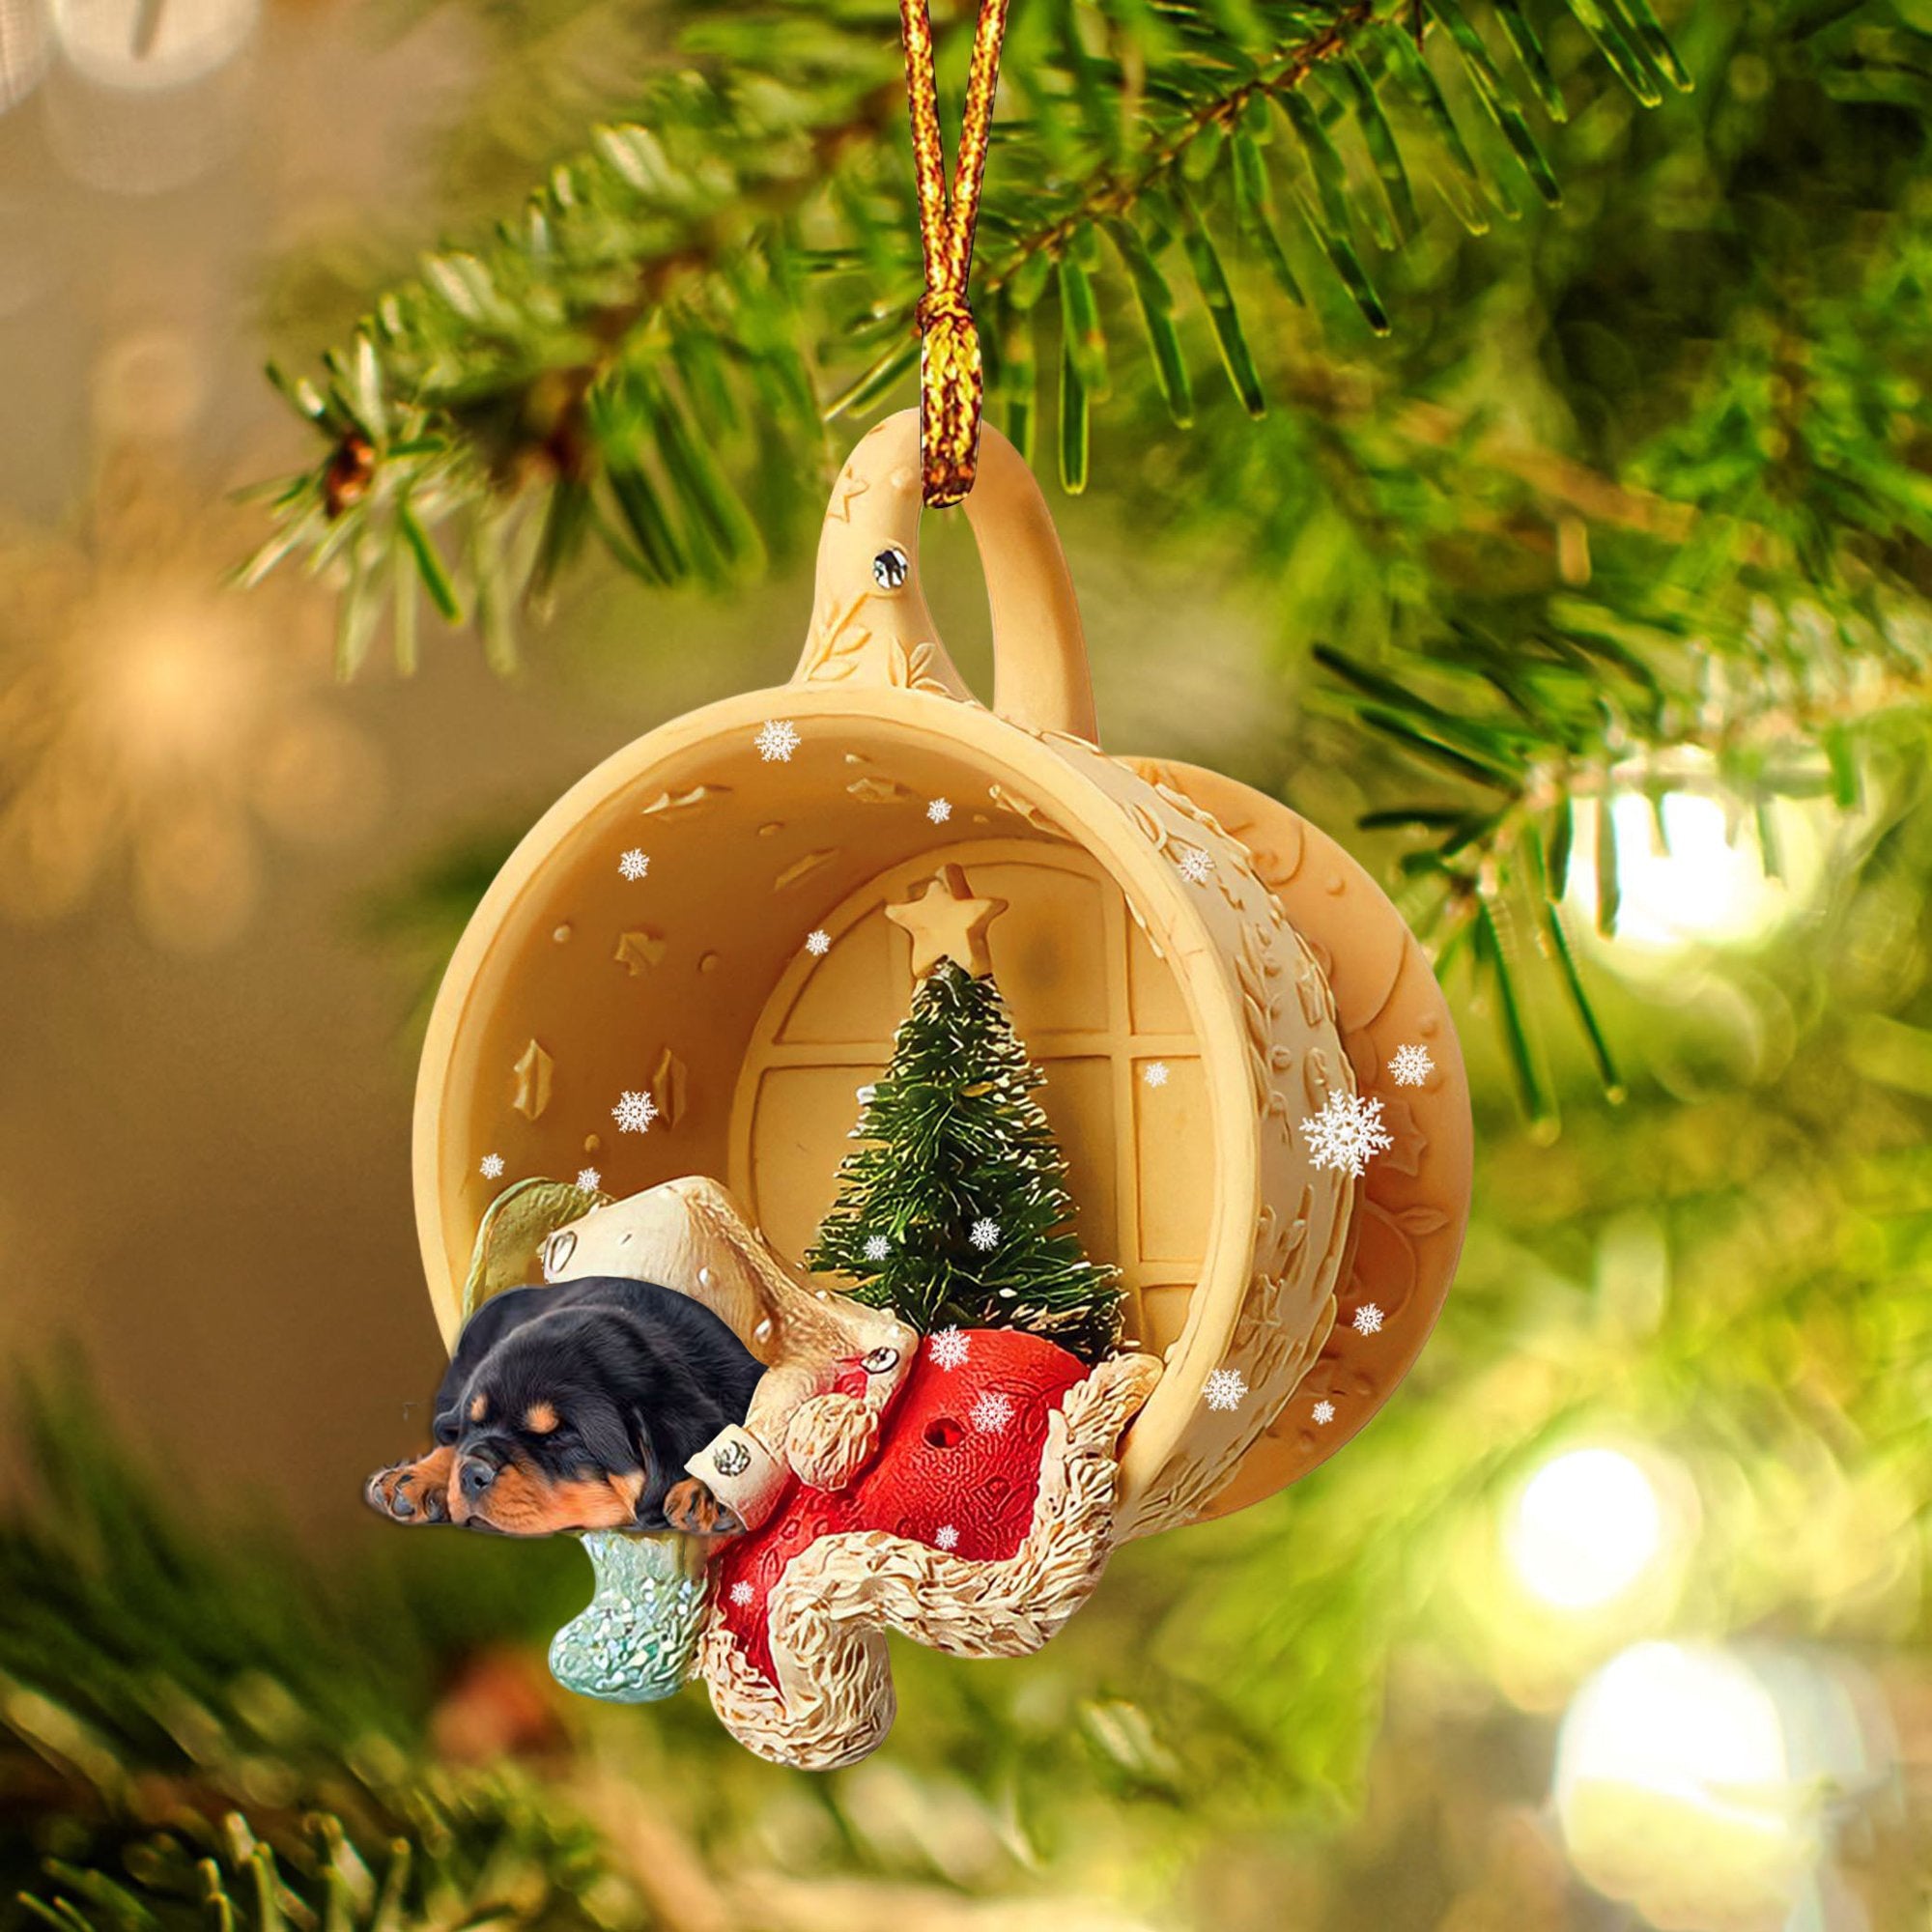 Rottweiler Sleeping In A Cup Christmas Ornament